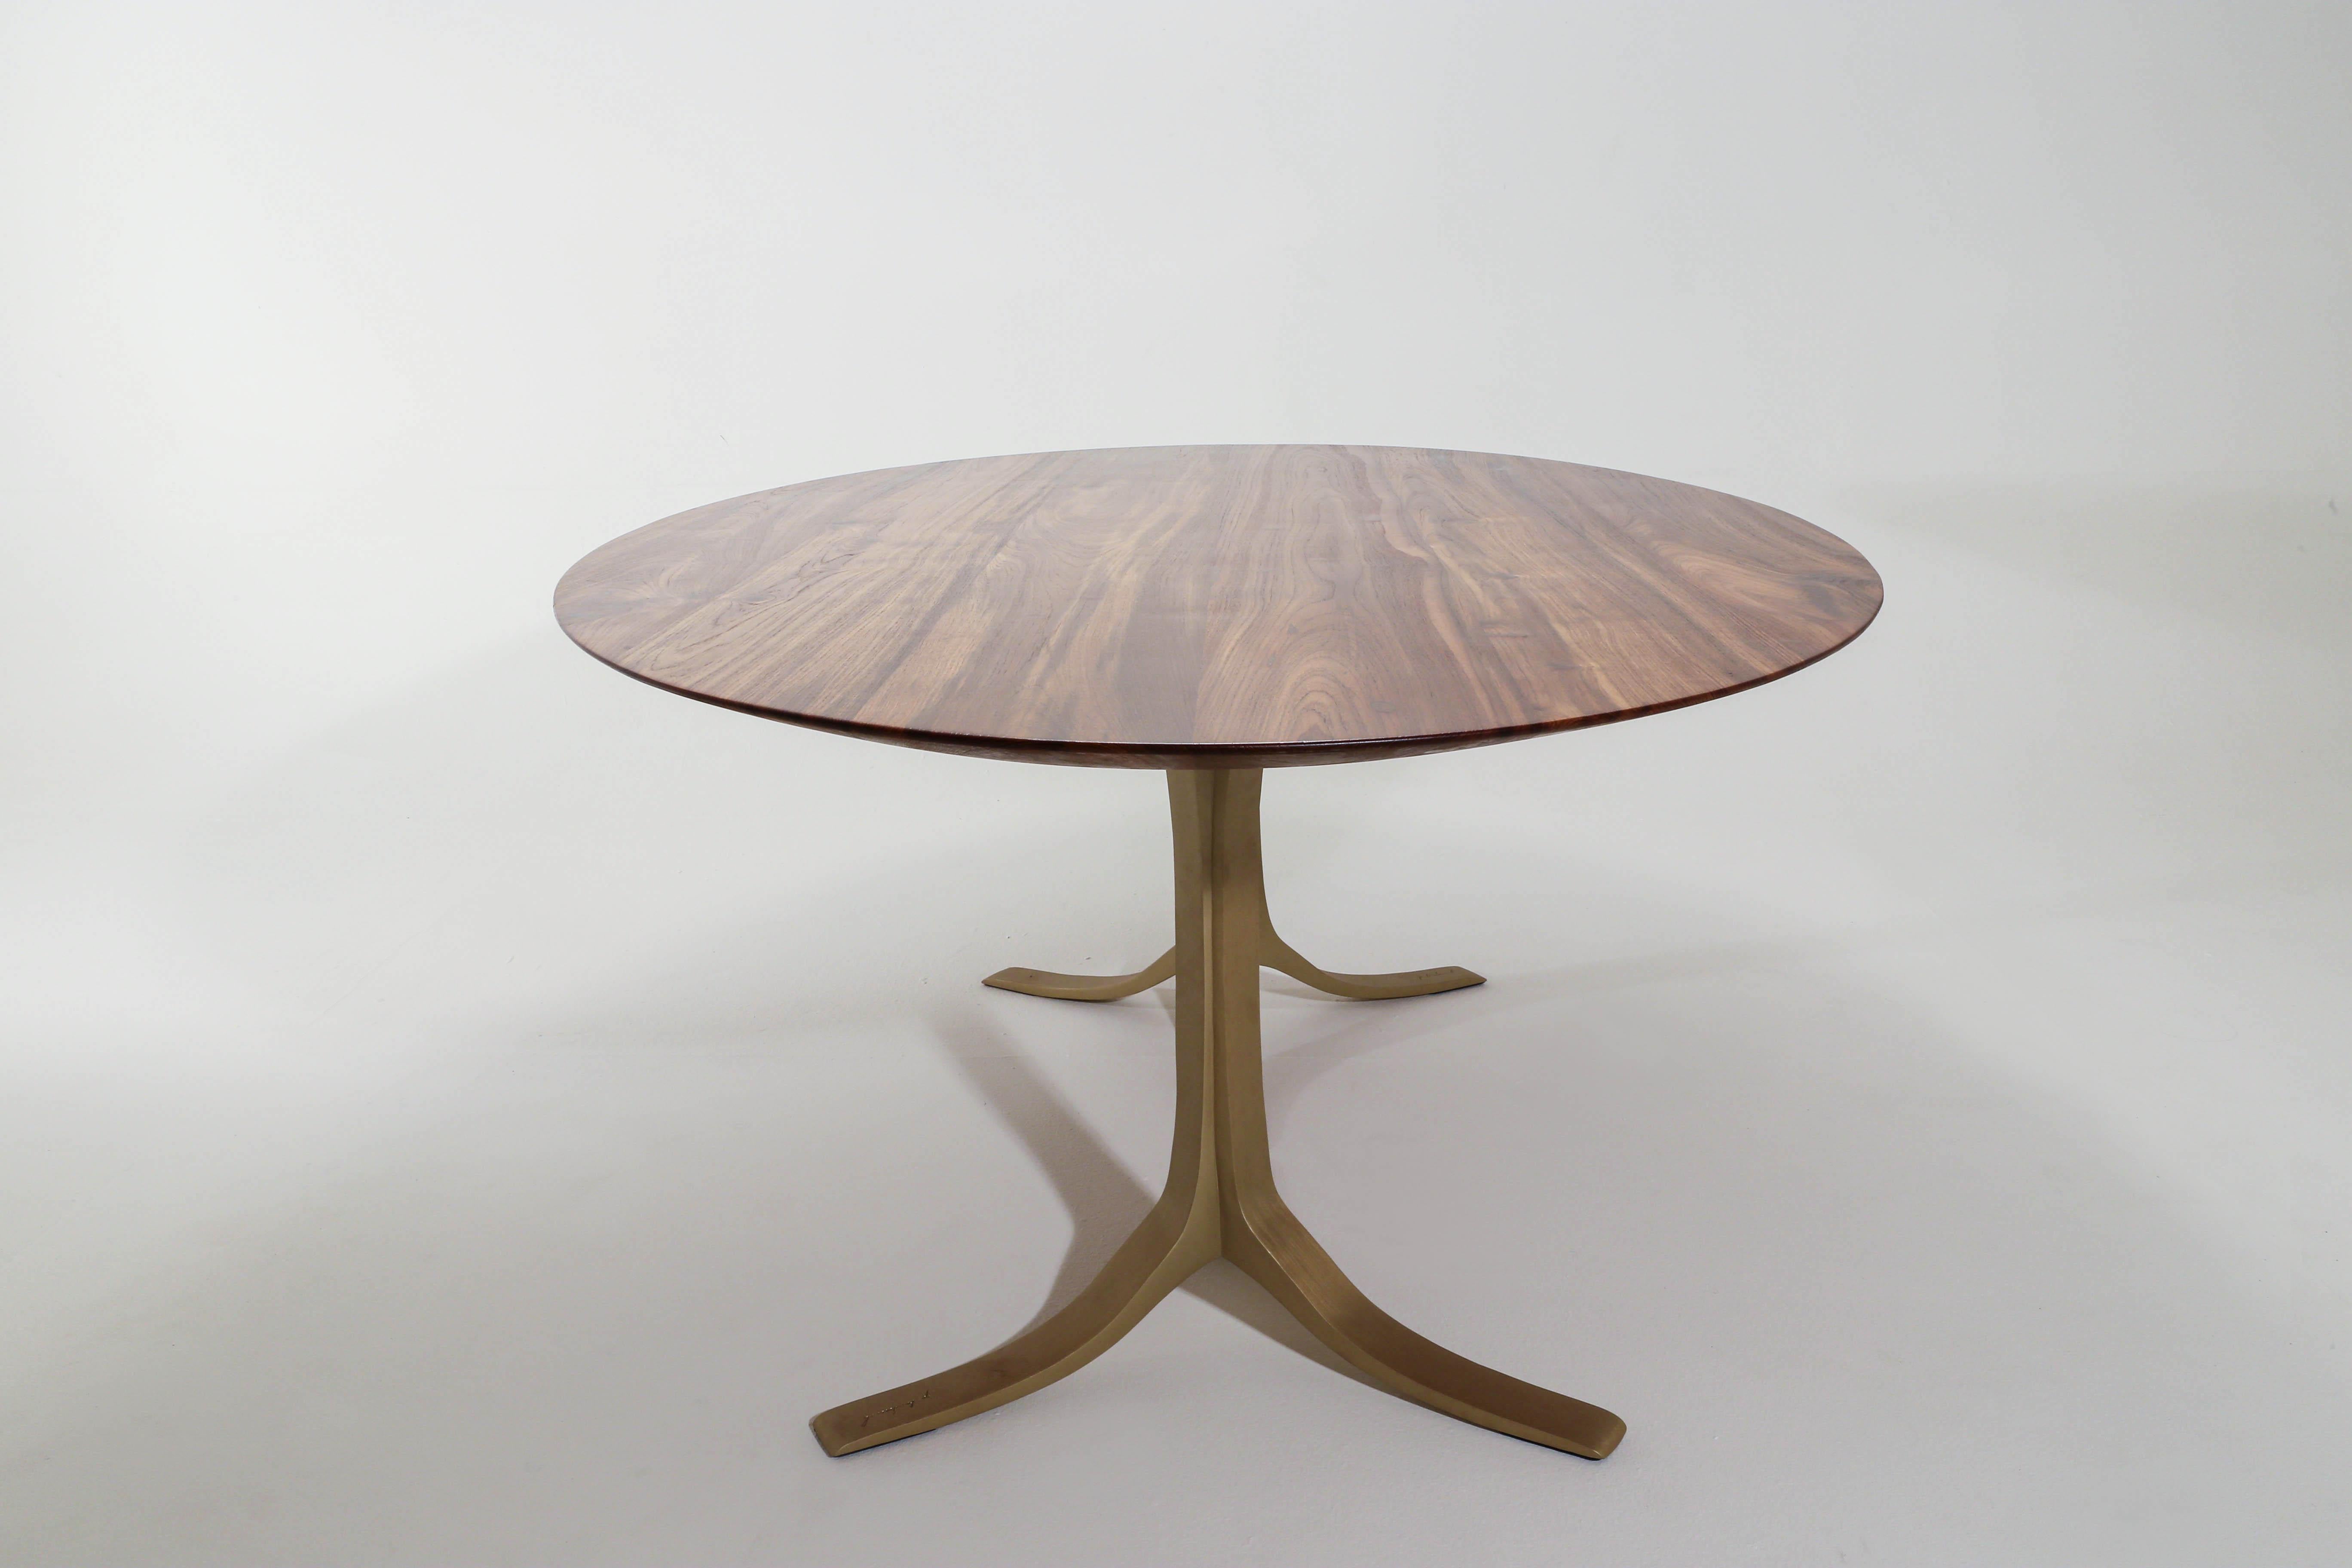 Minimalist Bespoke Oval Table, Reclaimed Hardwood with Brass Base, by P. Tendercool For Sale